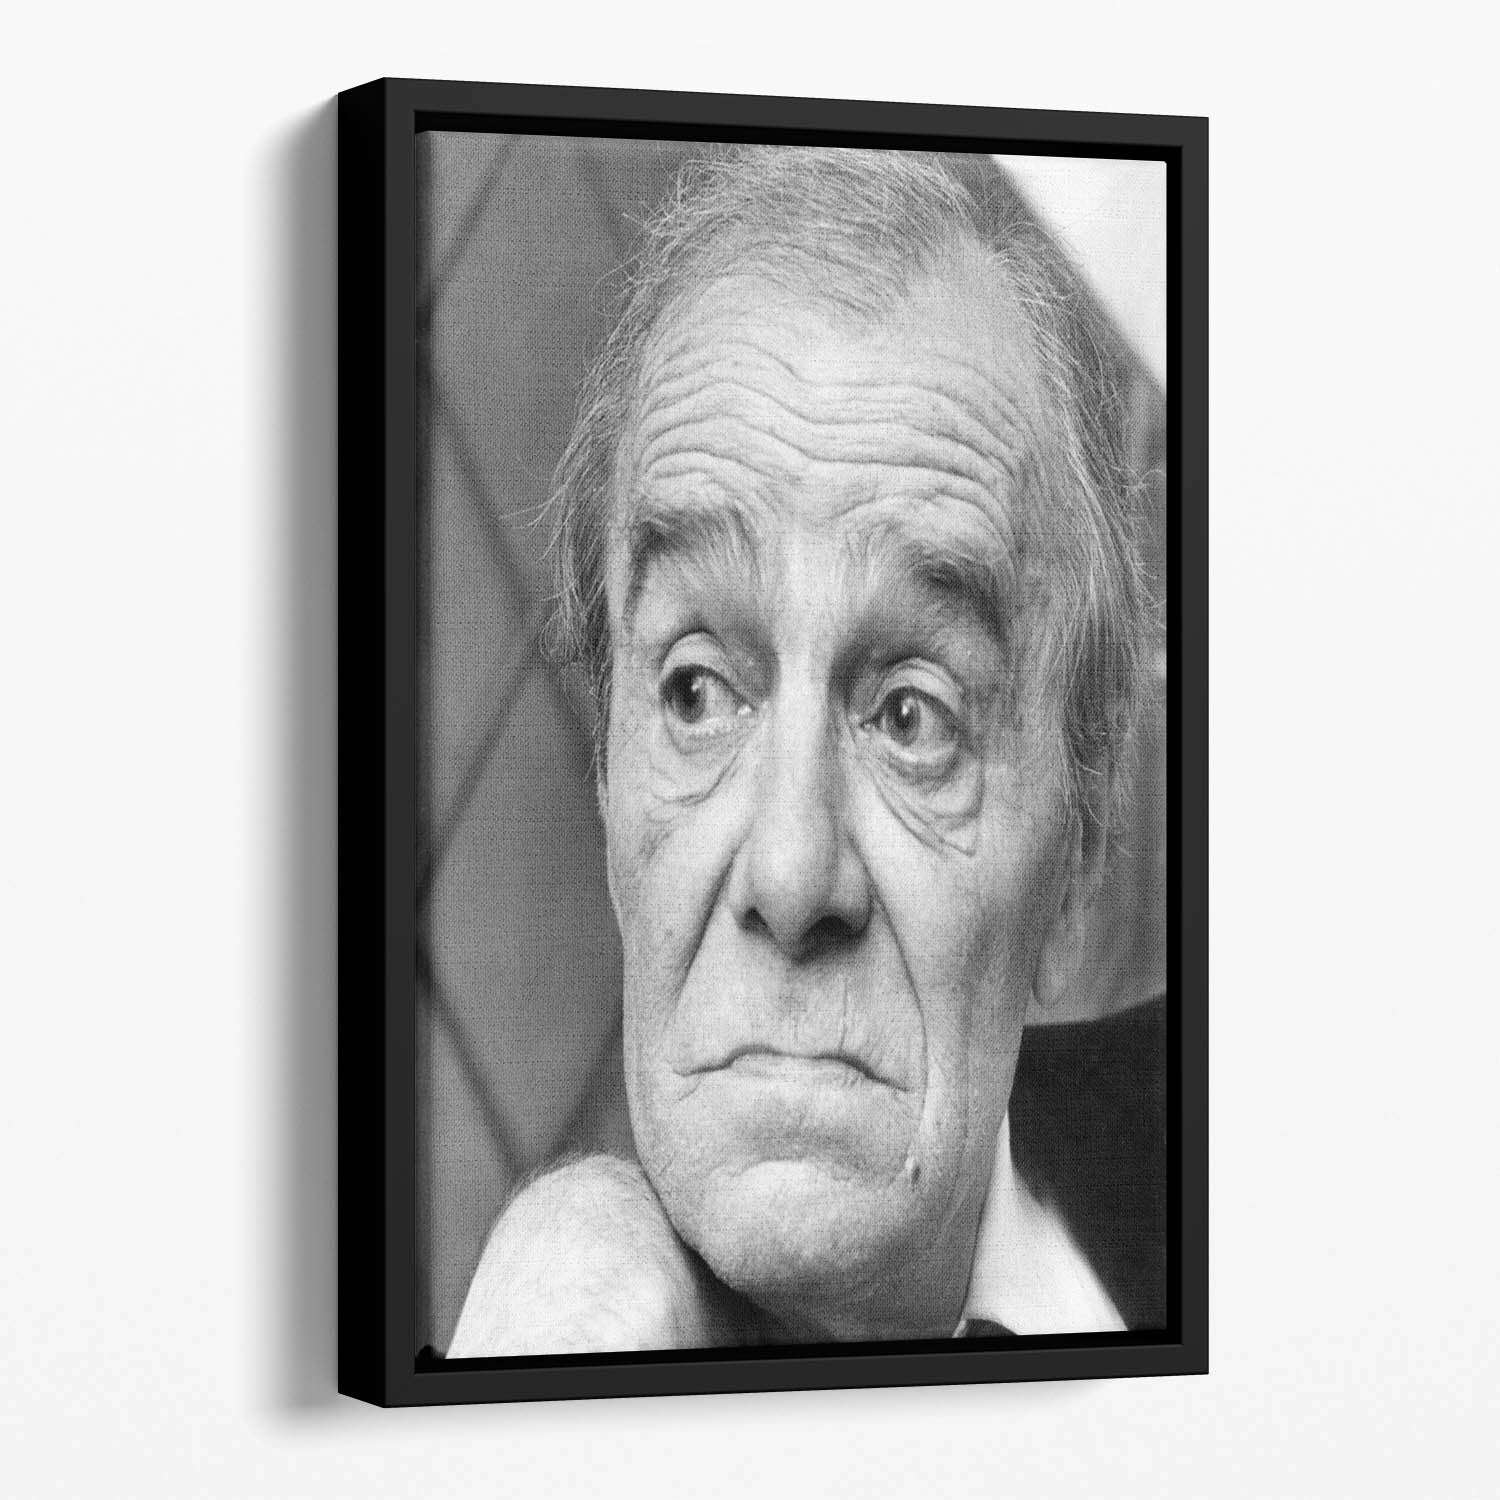 Max Wall Floating Framed Canvas